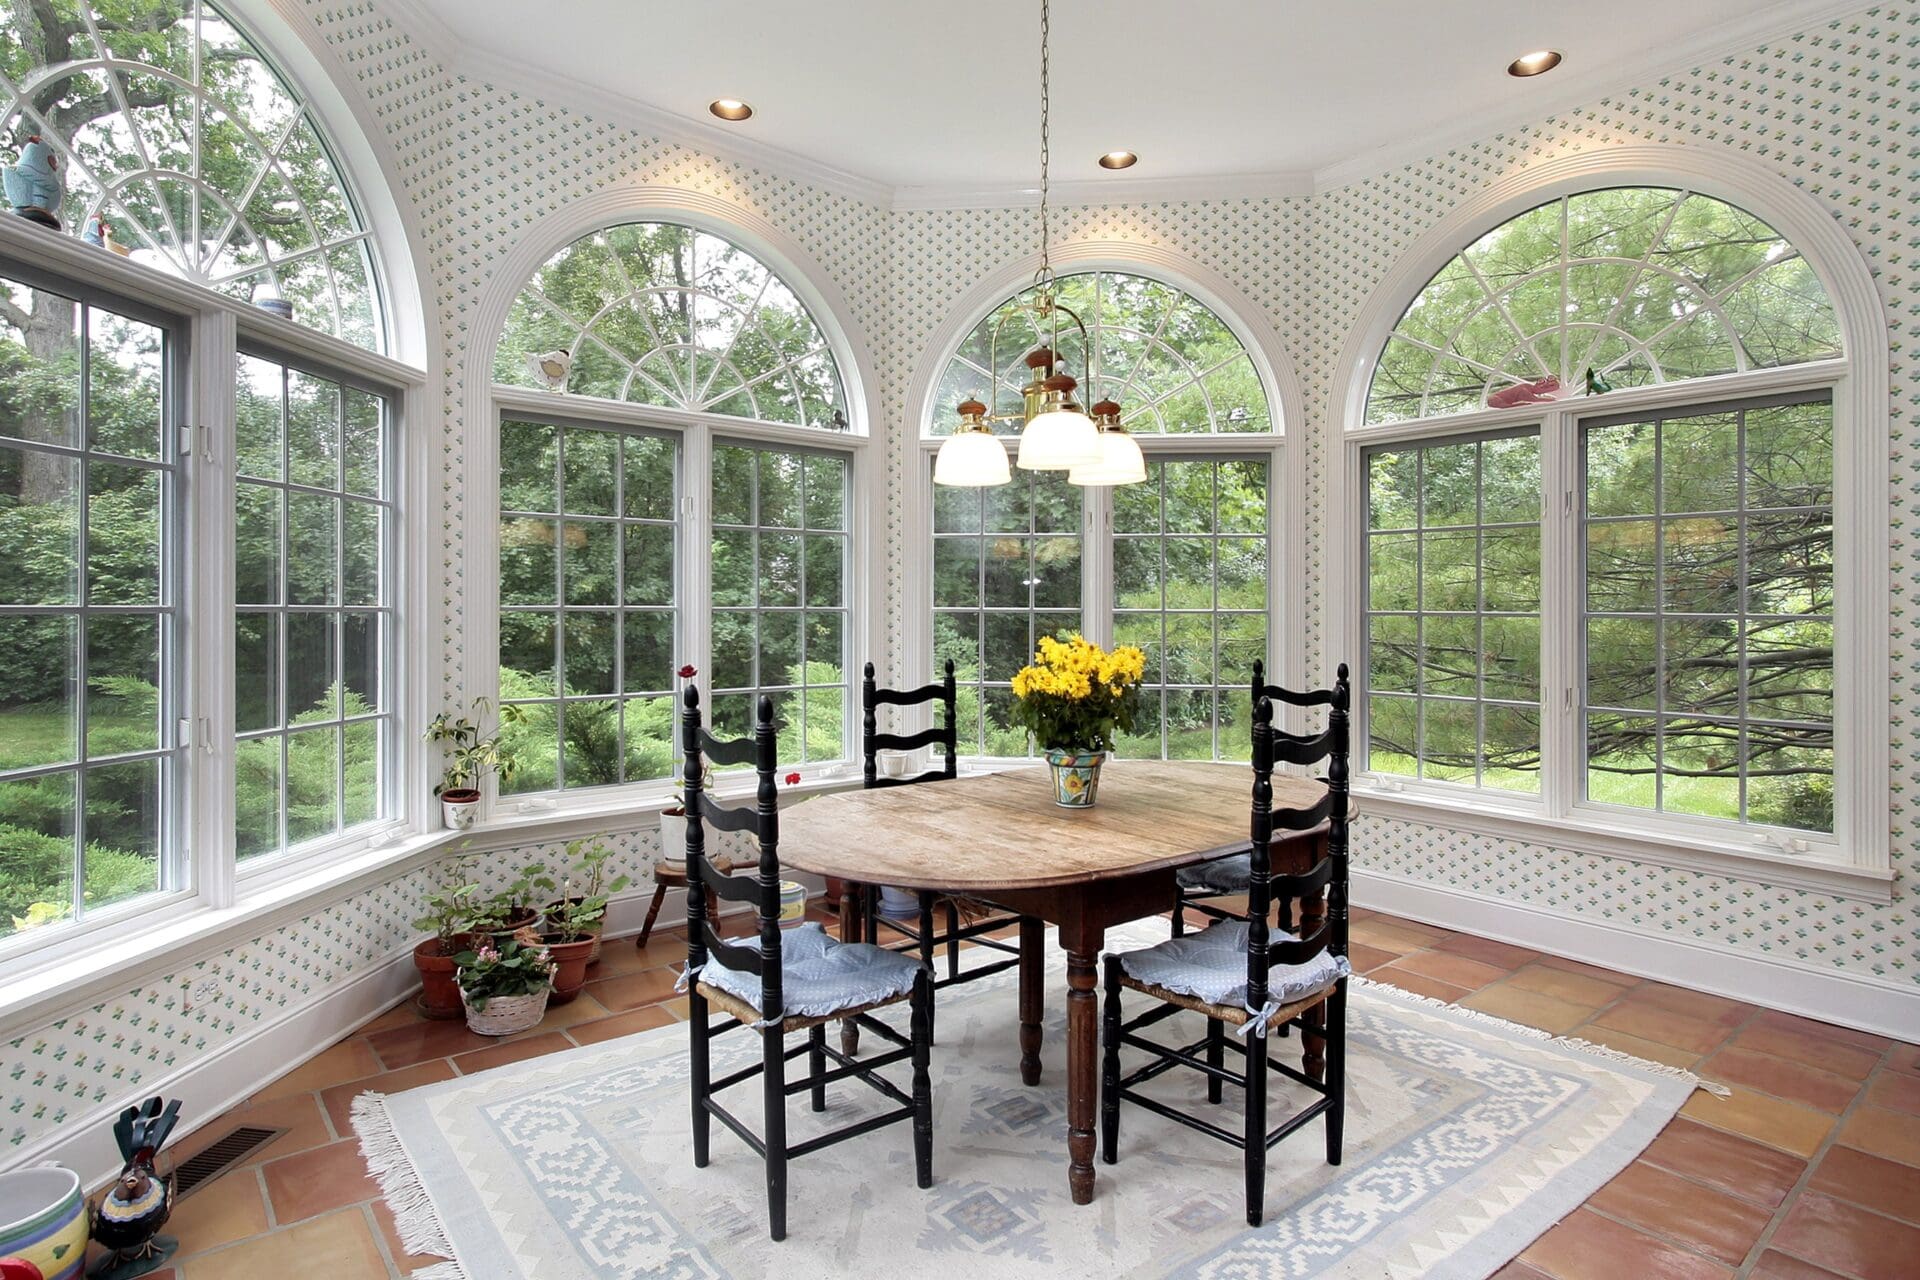 Eating area with large round glass picture windows